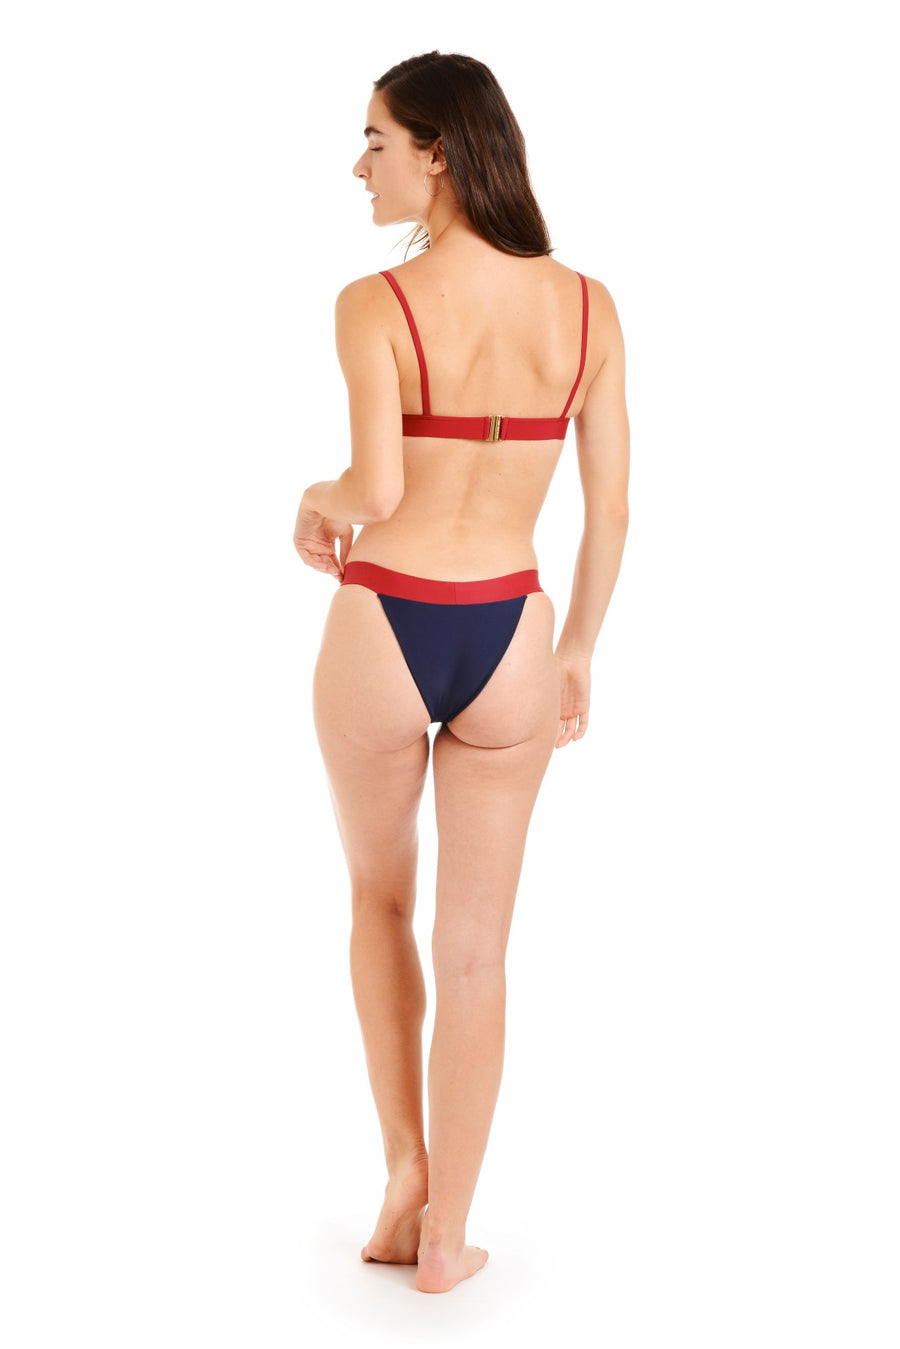 Back view of a woman wearing a navy & red bikini top